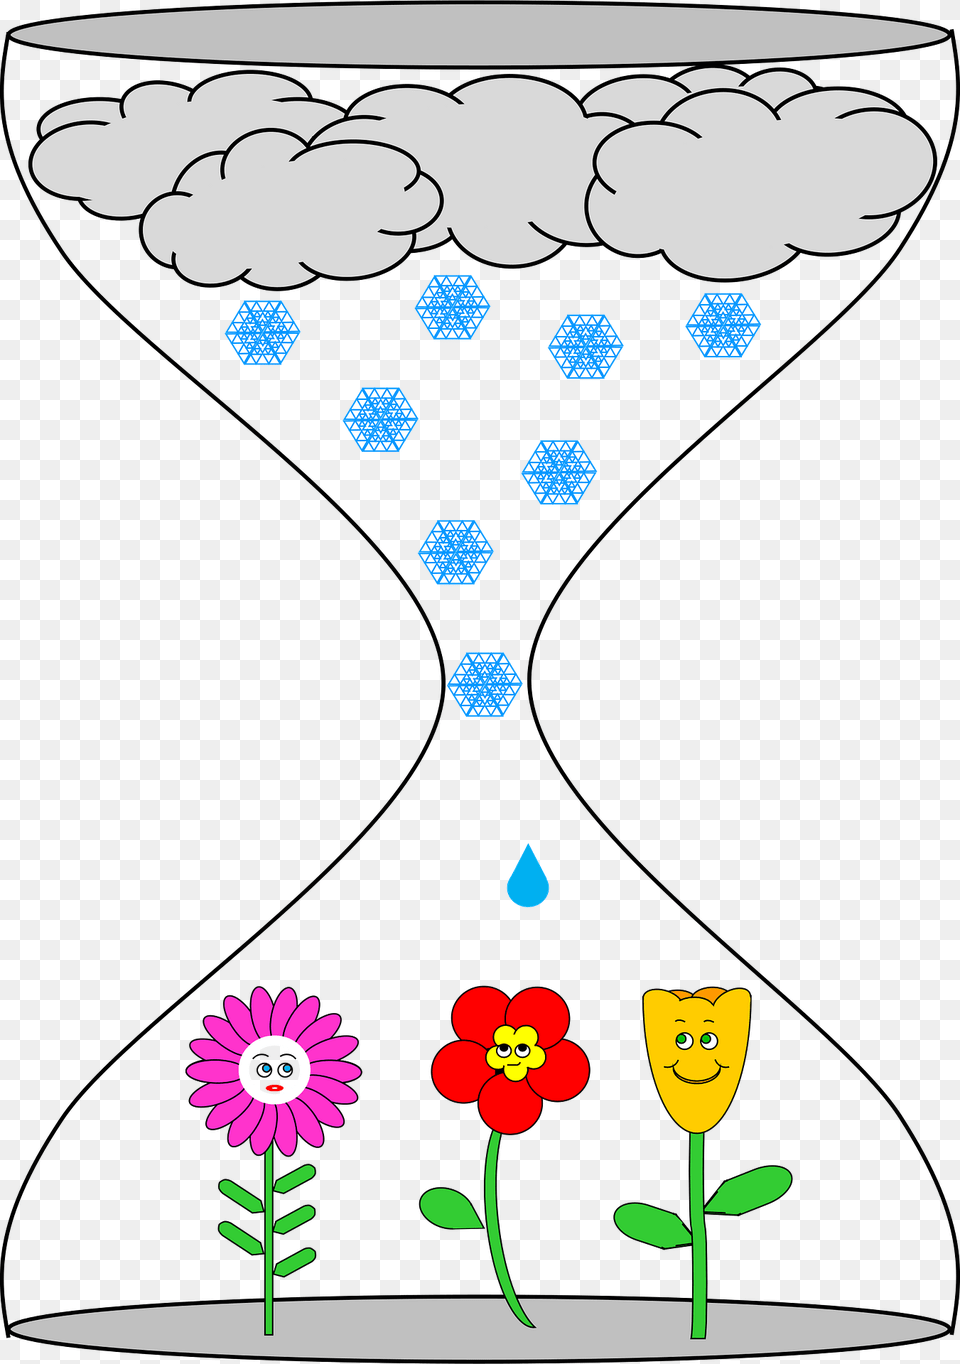 Hourglass With Clouds And Rain Falling On Flowers Clipart Free Png